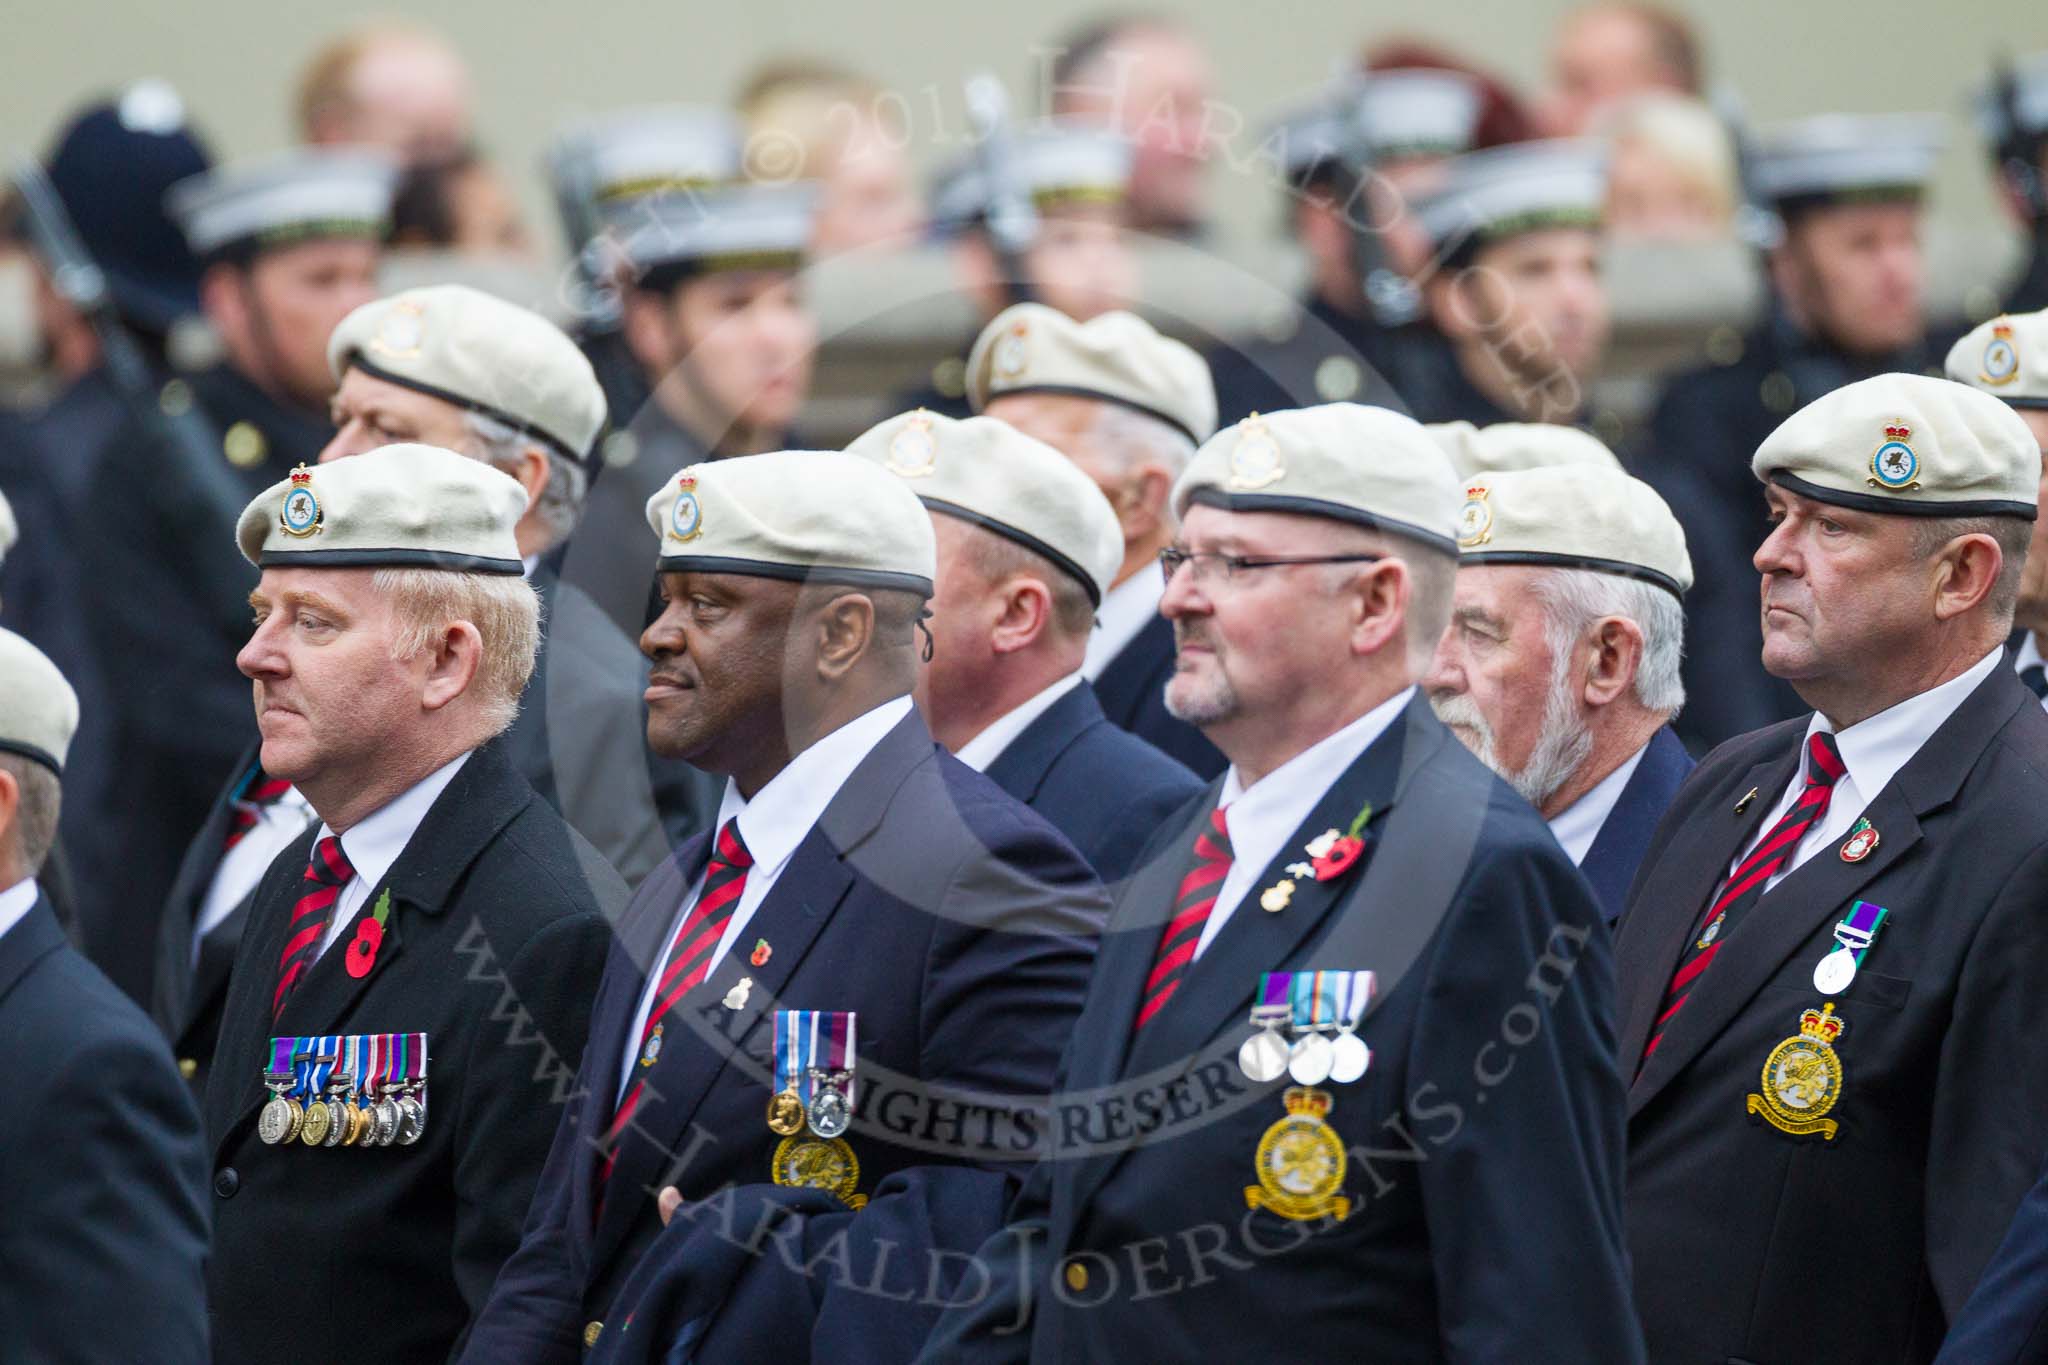 Remembrance Sunday at the Cenotaph 2015: Group C24, Royal Air Force Police Association.
Cenotaph, Whitehall, London SW1,
London,
Greater London,
United Kingdom,
on 08 November 2015 at 11:50, image #567